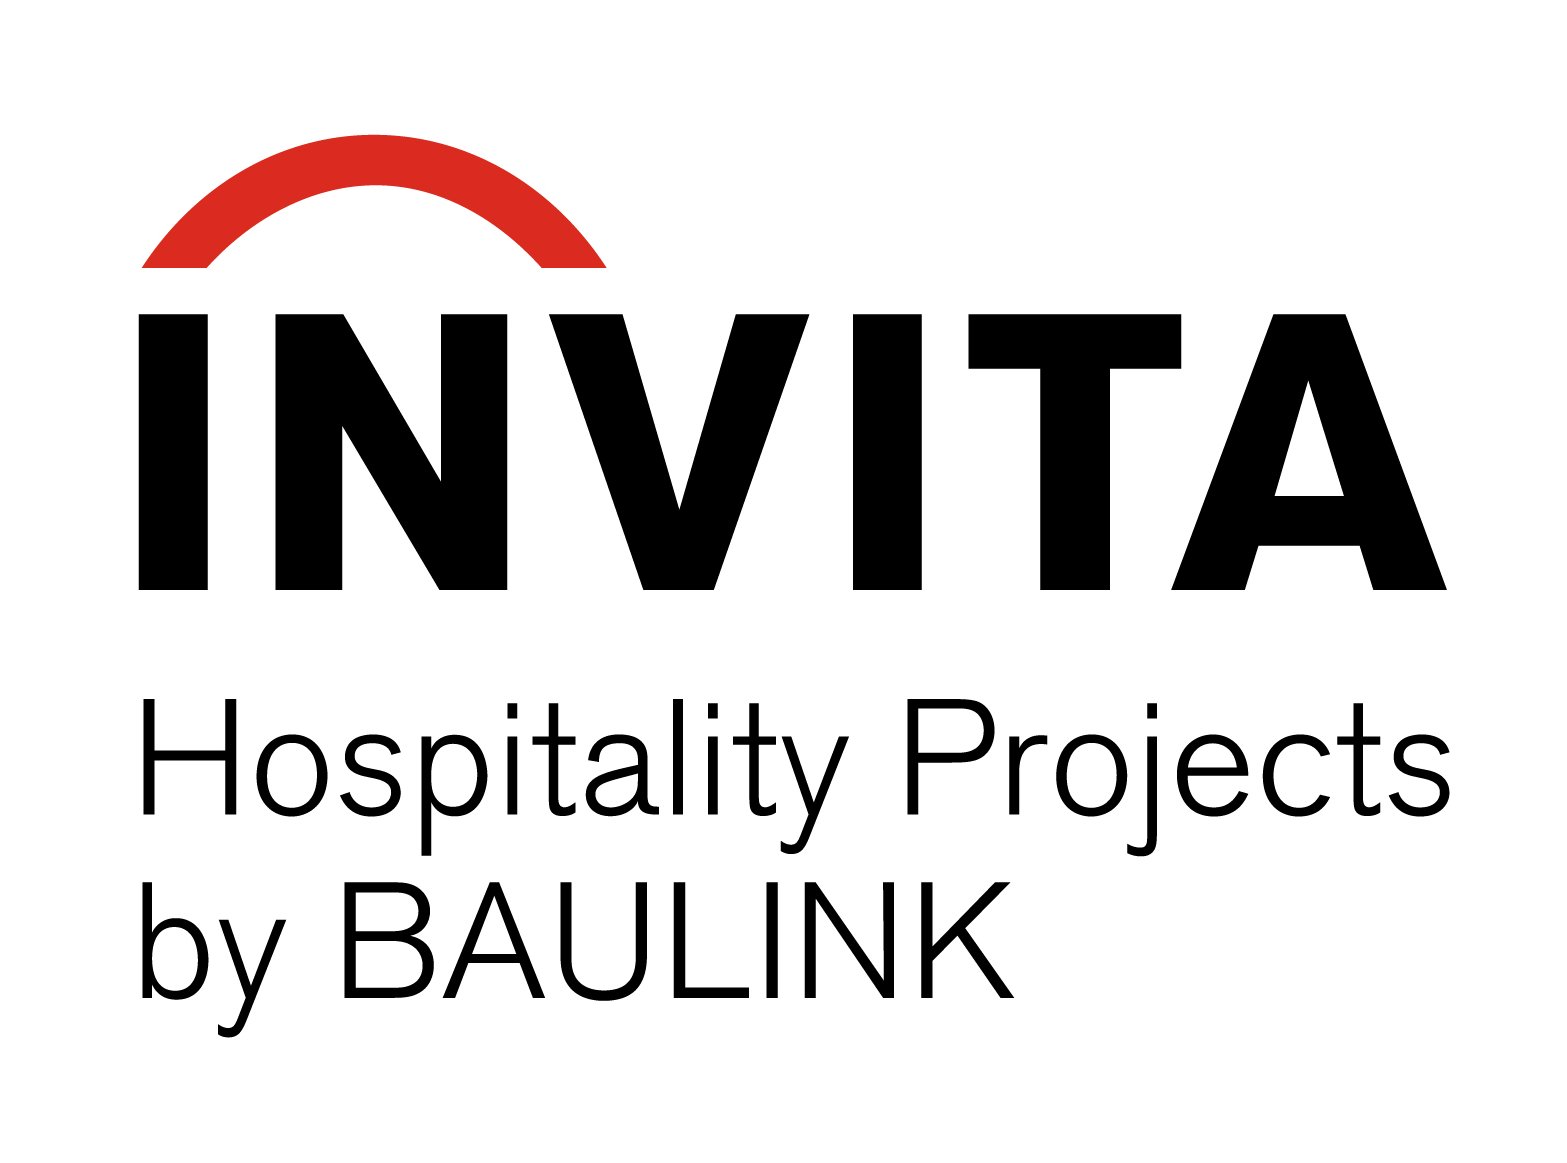 INVITA Hospitality Projects by BAULINK